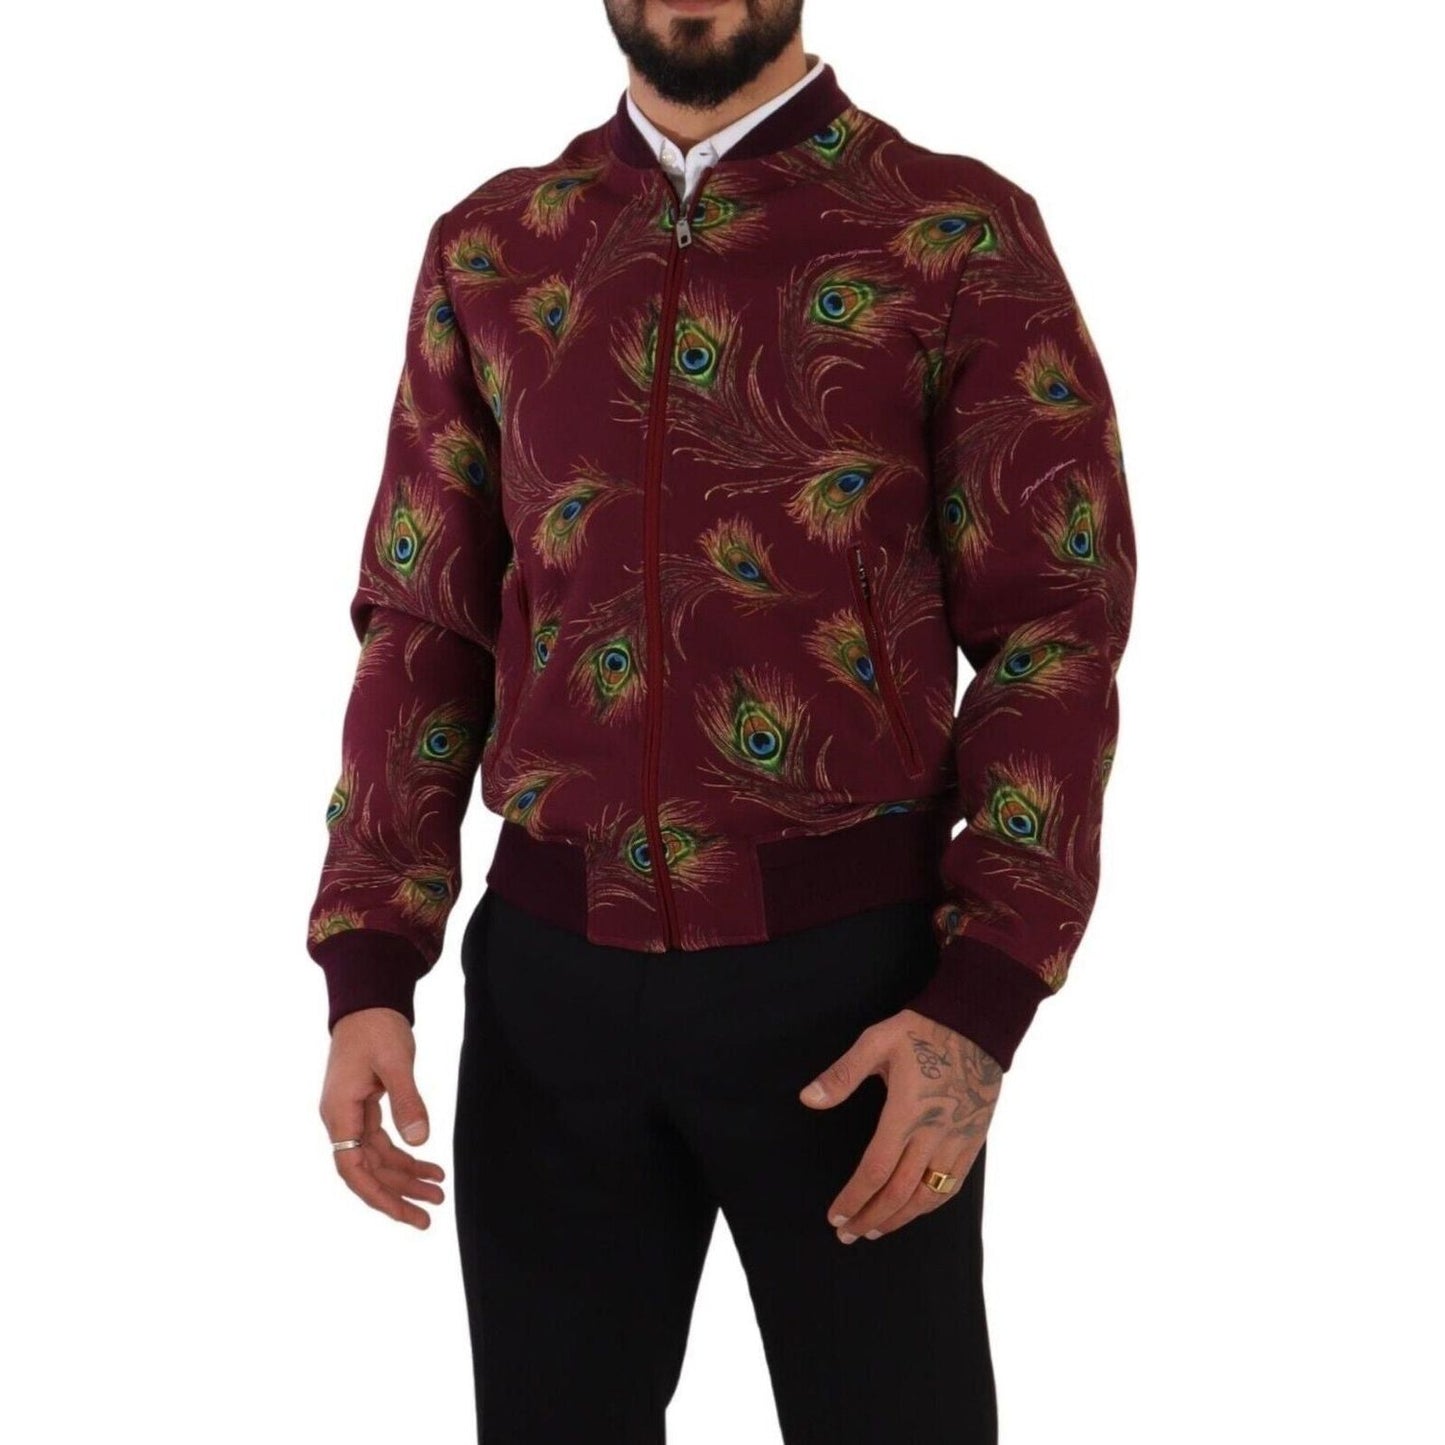 Dolce & Gabbana Radiant Red Peacock Print Bomber Jacket red-peacock-polyester-stretch-full-zip-jacket